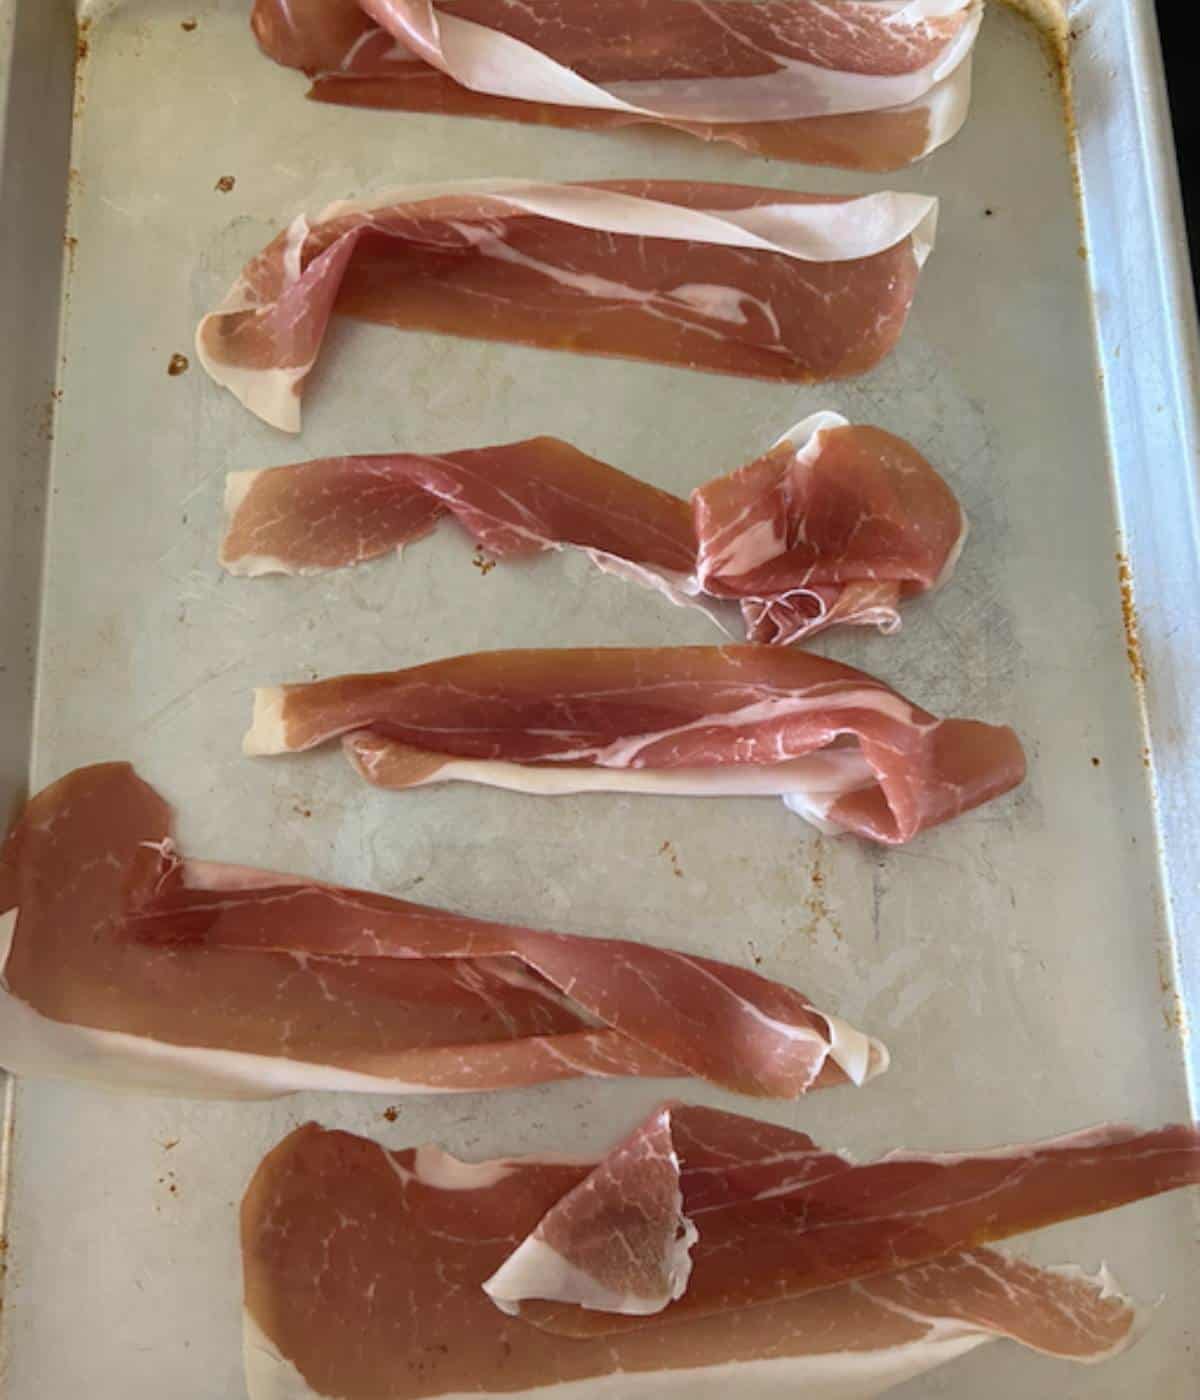 Prosciutto uncooked on baking tray.